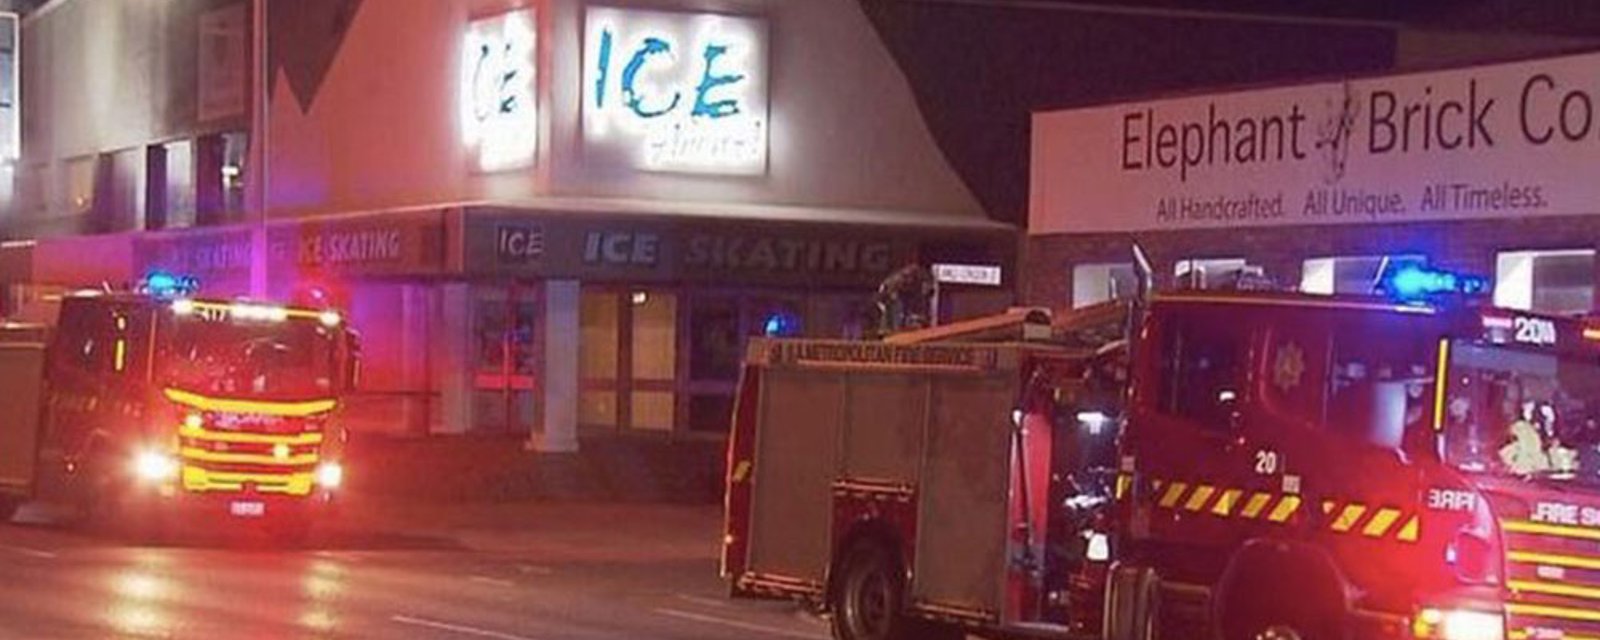 Nearly 40 people rushed to hospital after mass poisoning at local ice rink